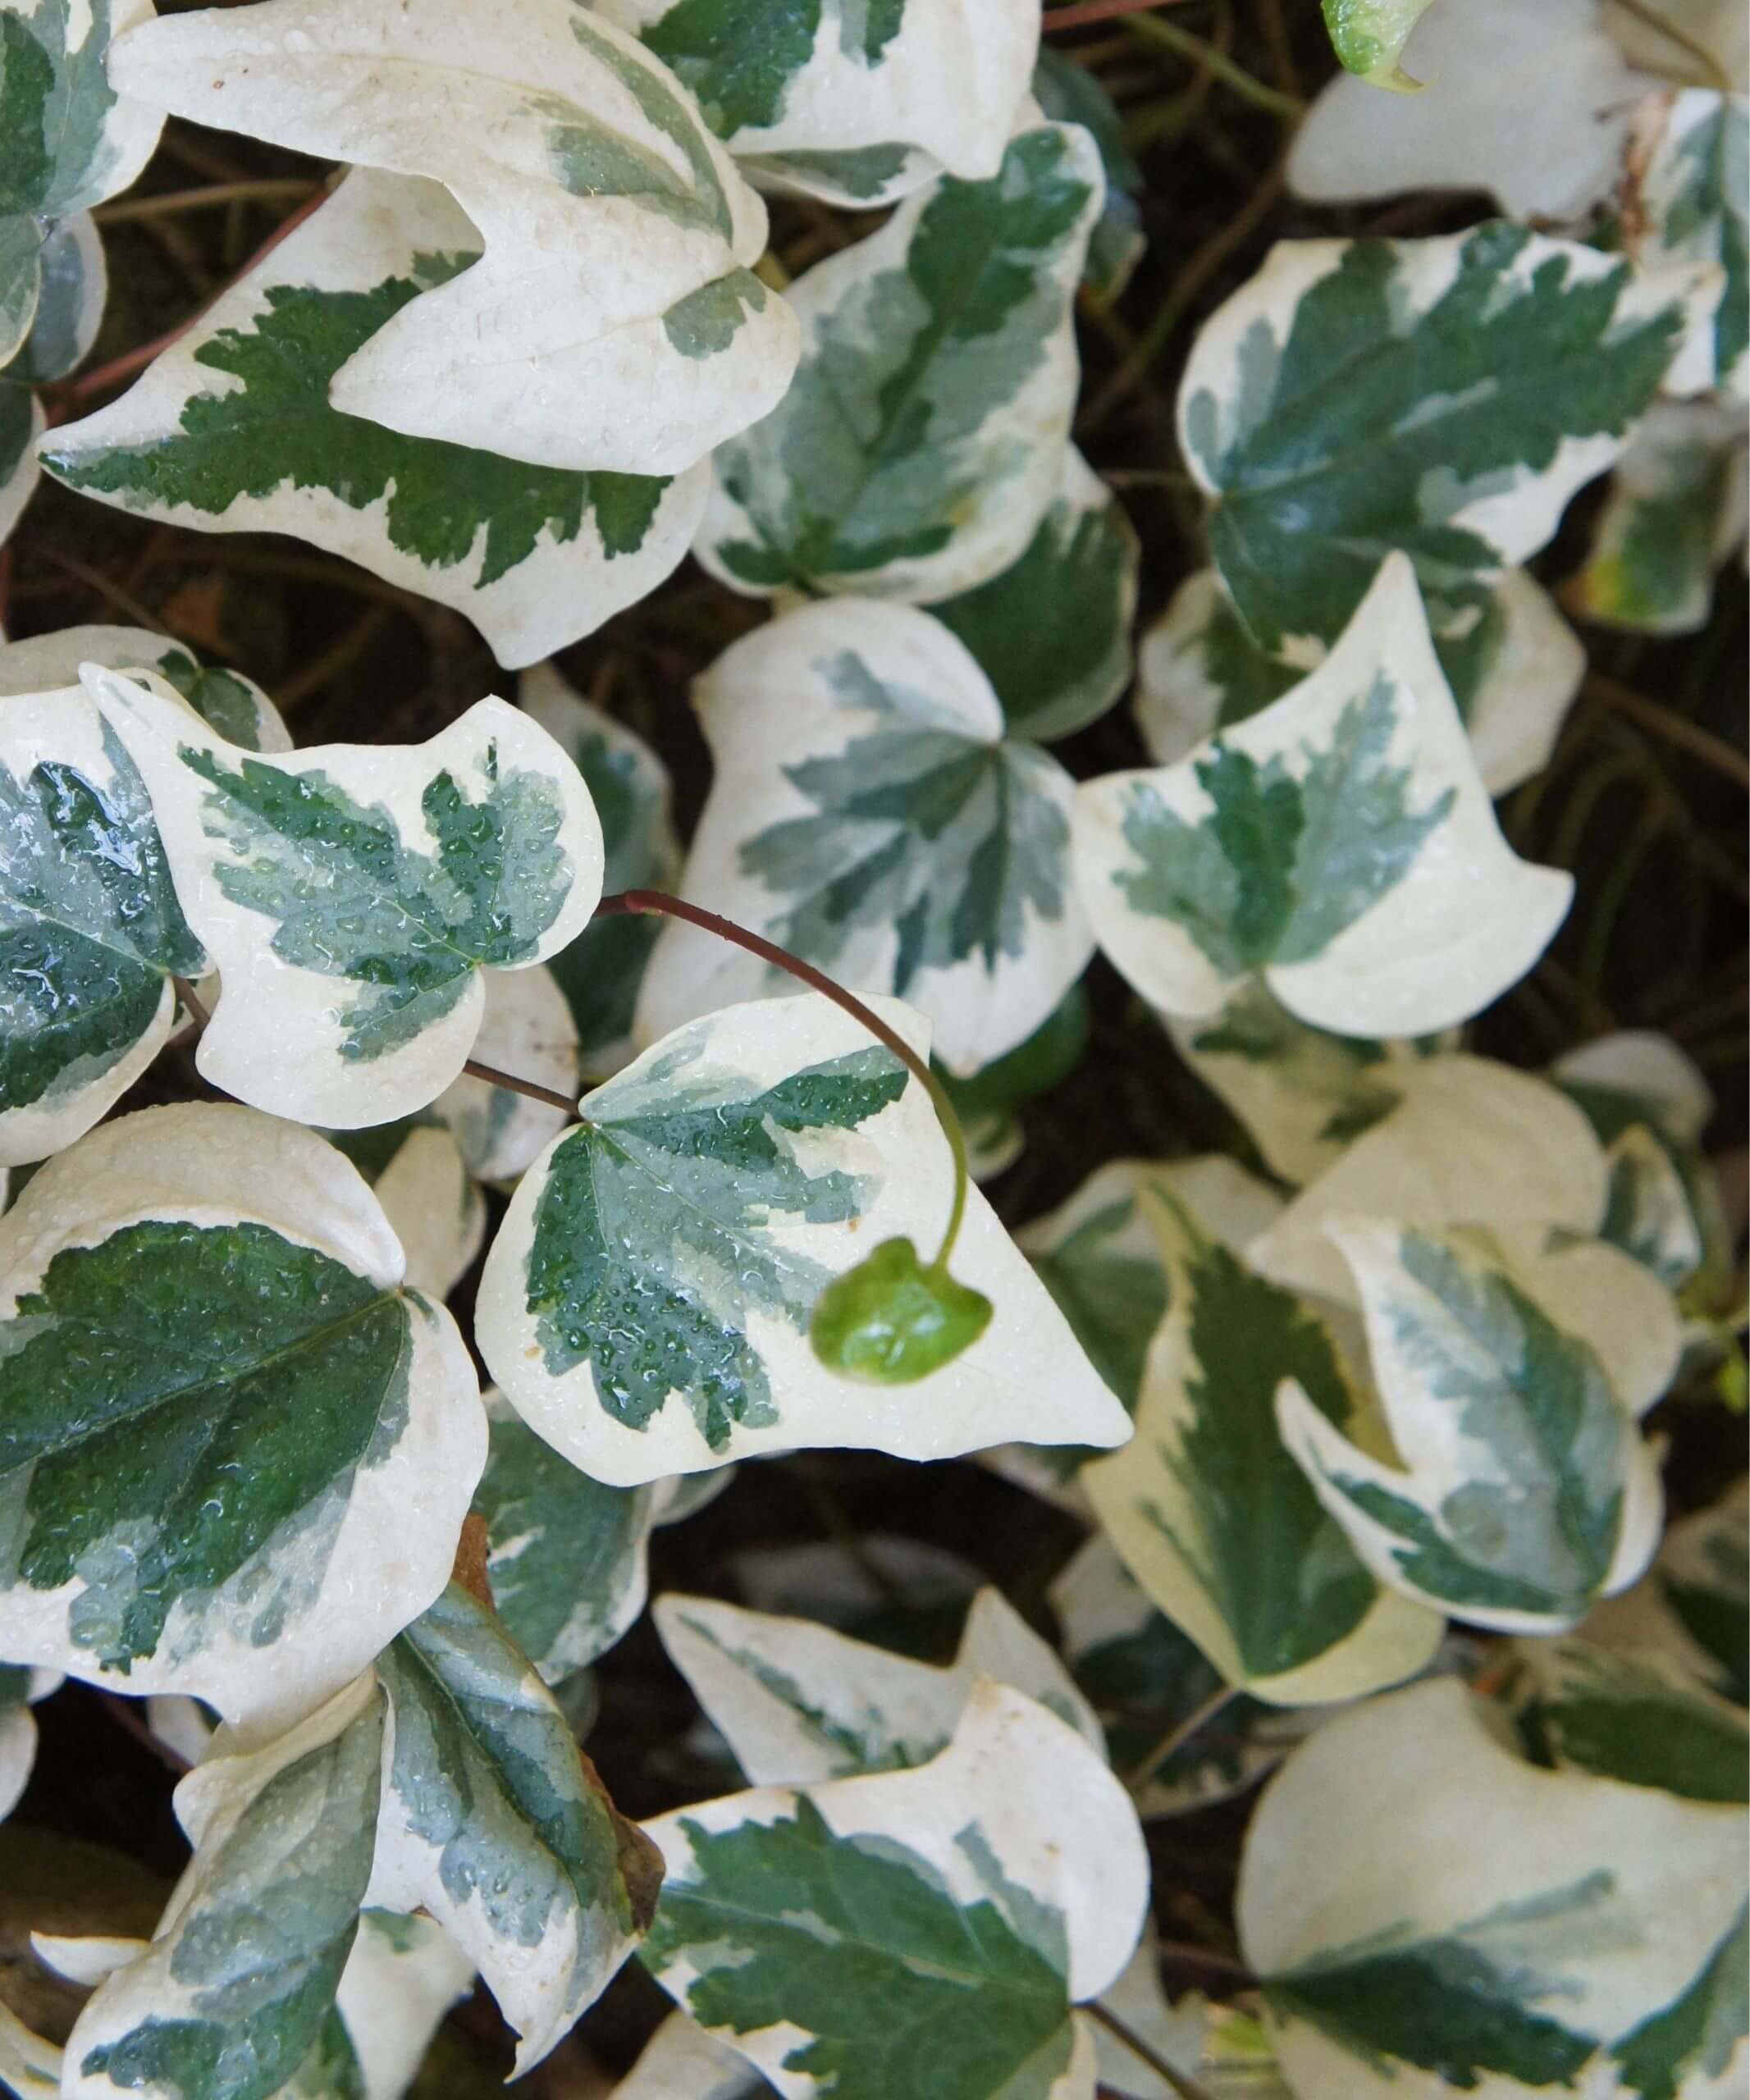 Ivy 101: How to Care for Ivy Plants